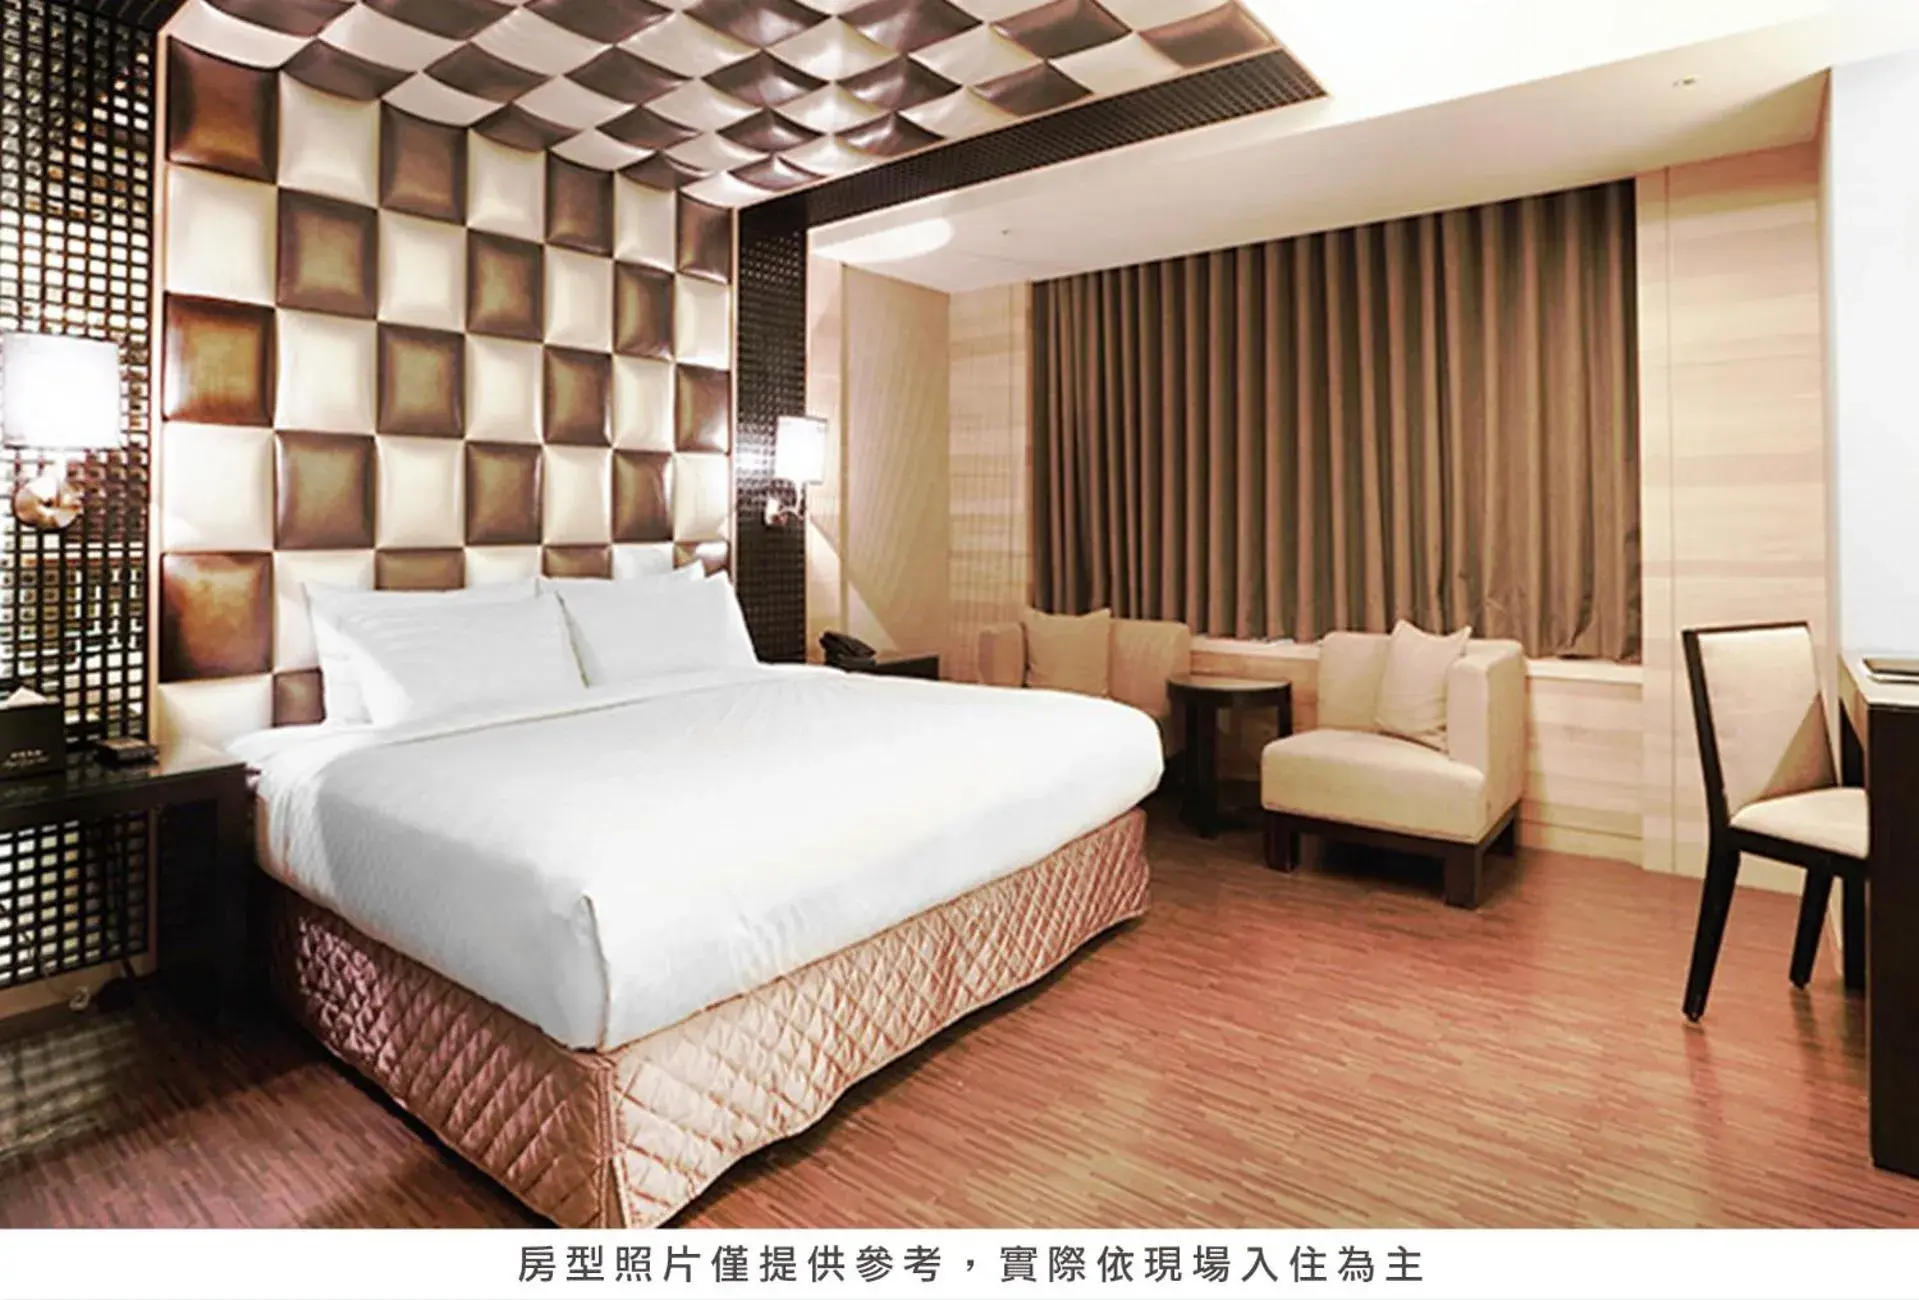 Bed in Royal Group Hotel Chang Chien Branch